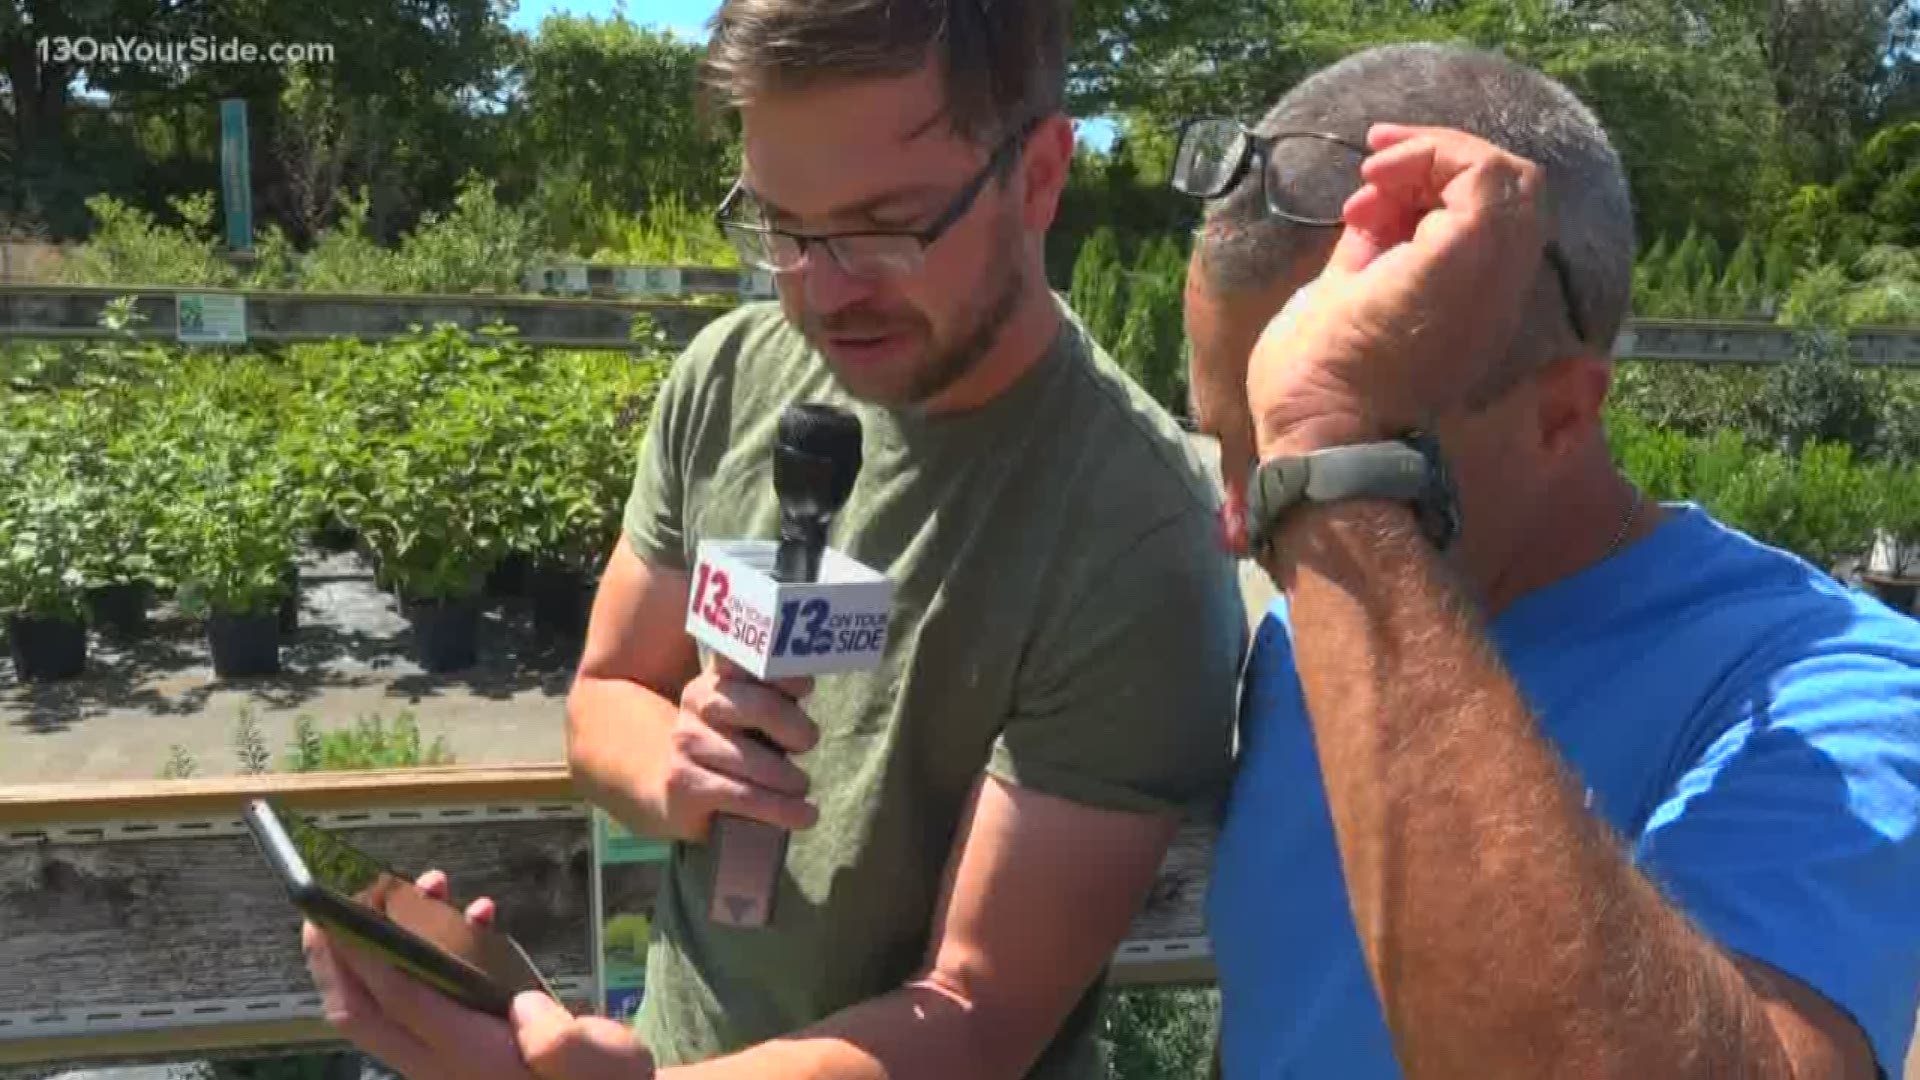 Greenthumb expert Rick Vuyst explores Google Glass and how it can be used in the garden.